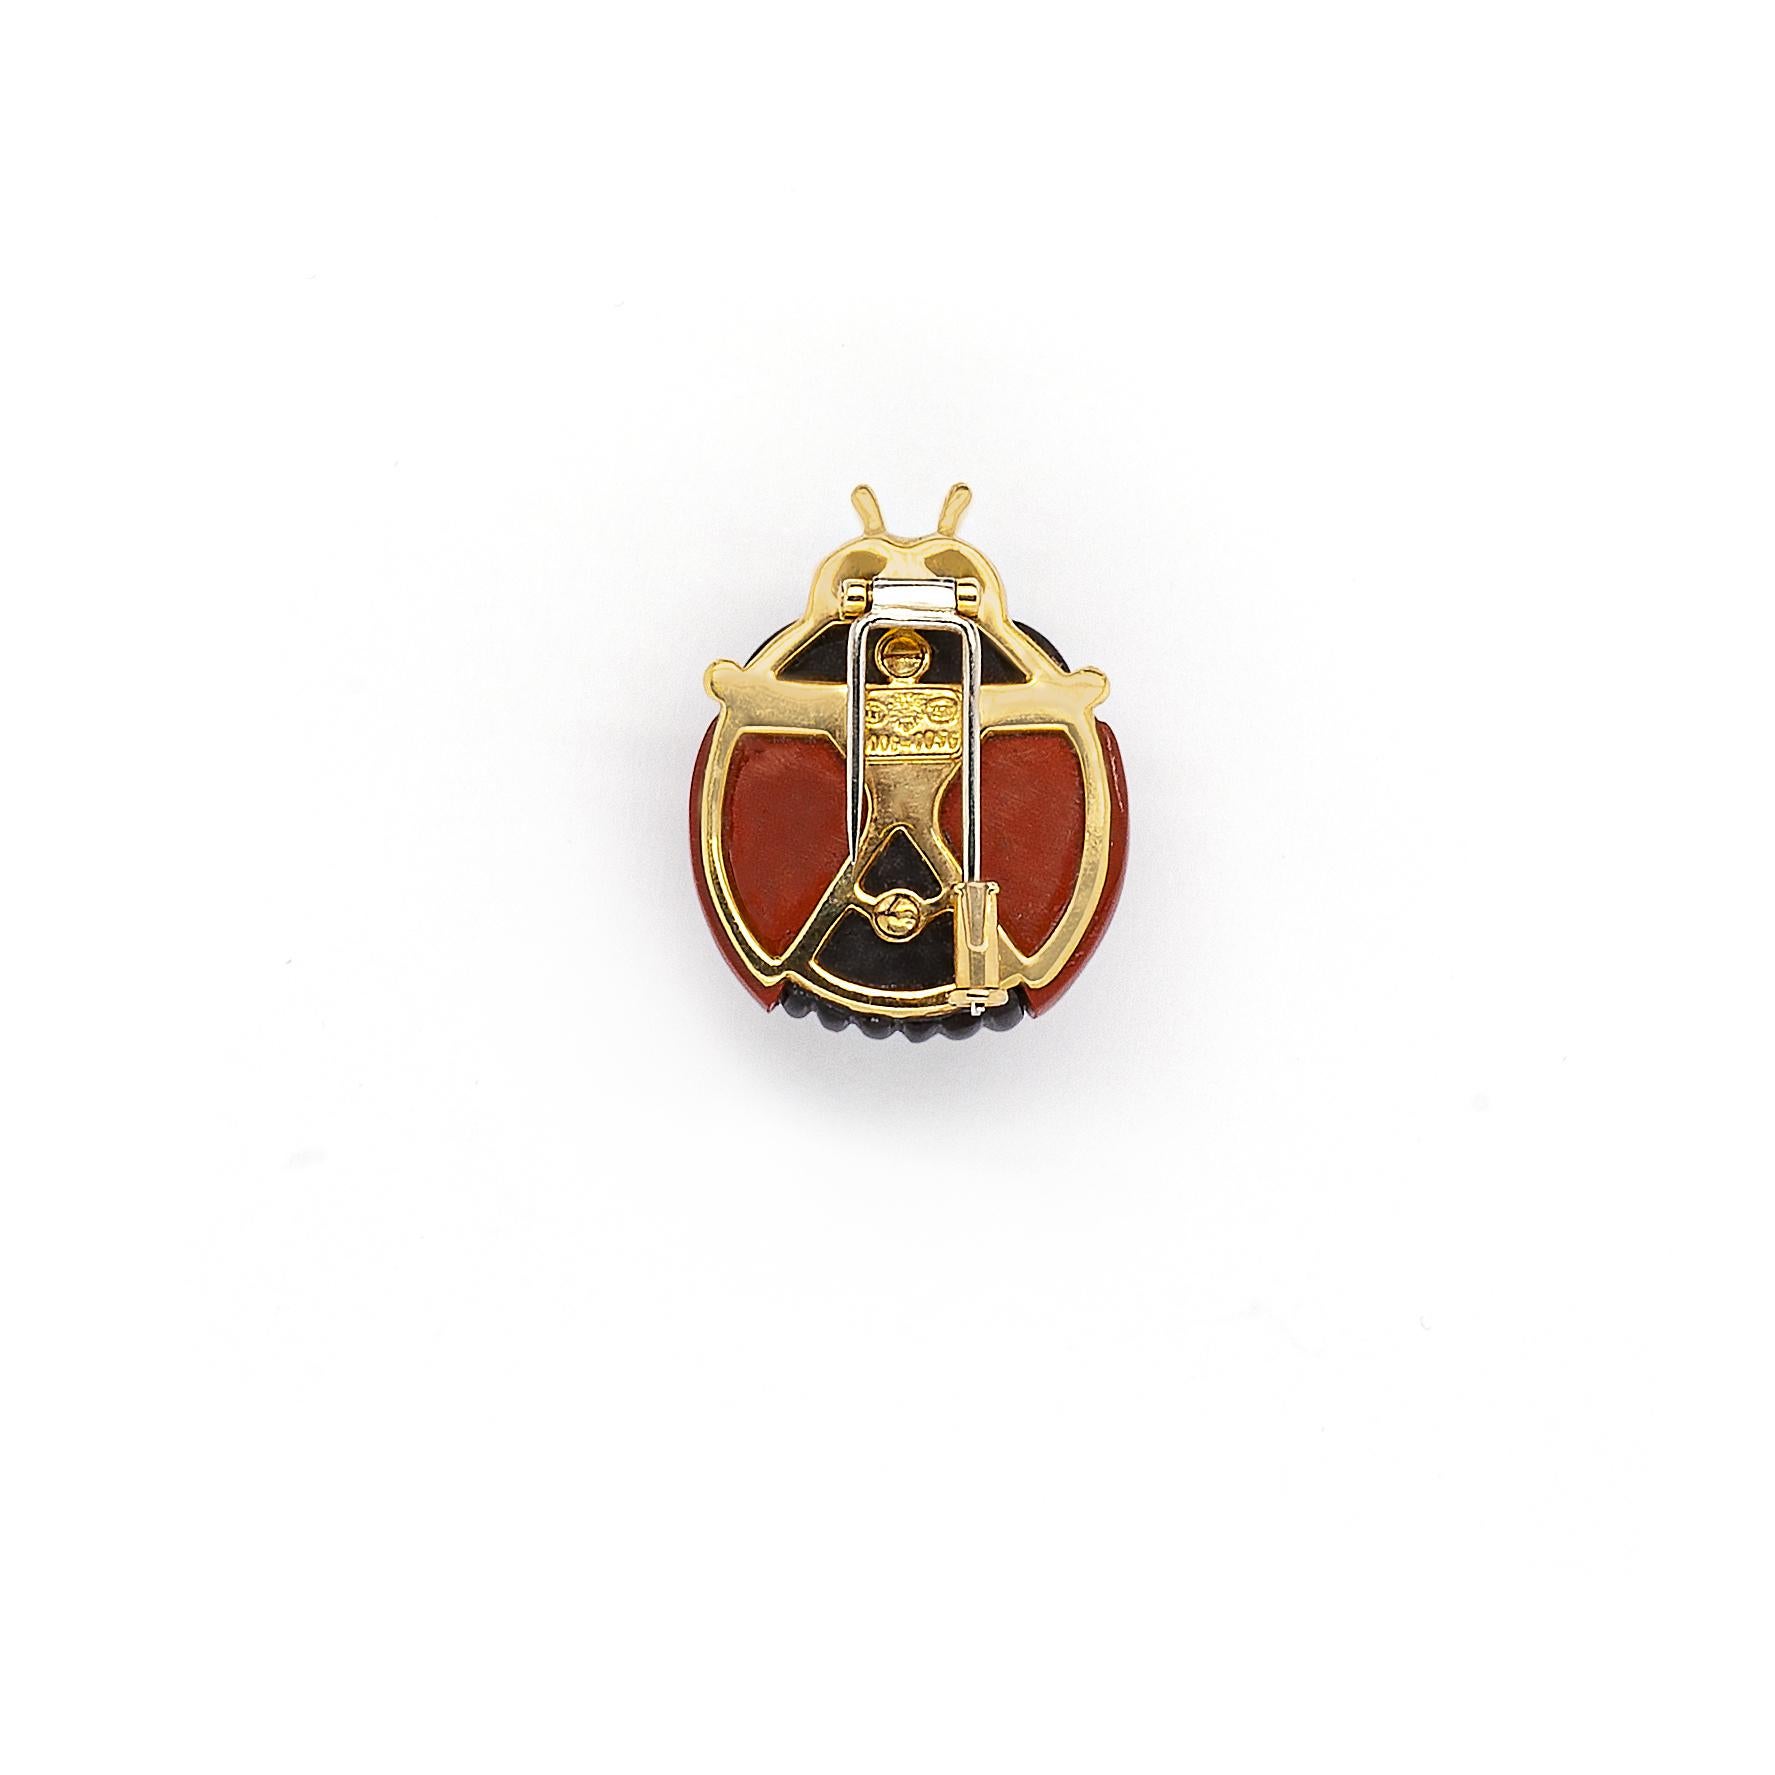 Crafted with fantastic attention to detail, this adorable ladybird brooch is sure to make heads turn!

The wonderful brooch is superbly designed as a stylised ladybug, that stands out with a captivating combination of diamonds, carnelian, black onyx